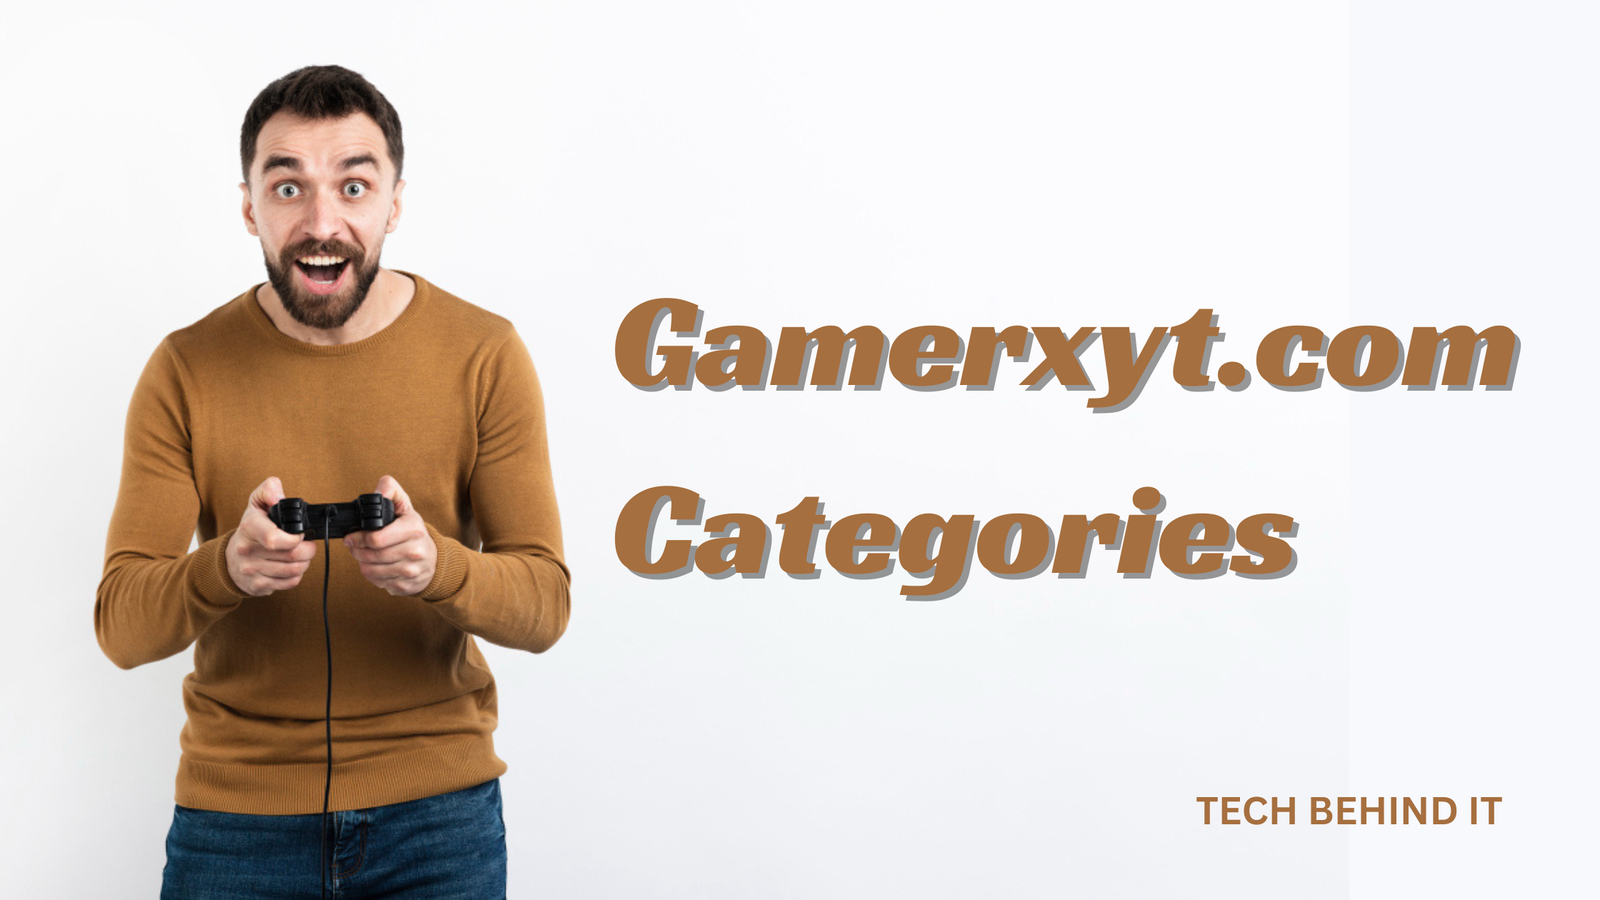 A World of Gaming Awaits: Unravel Gamerxyt.com Categories